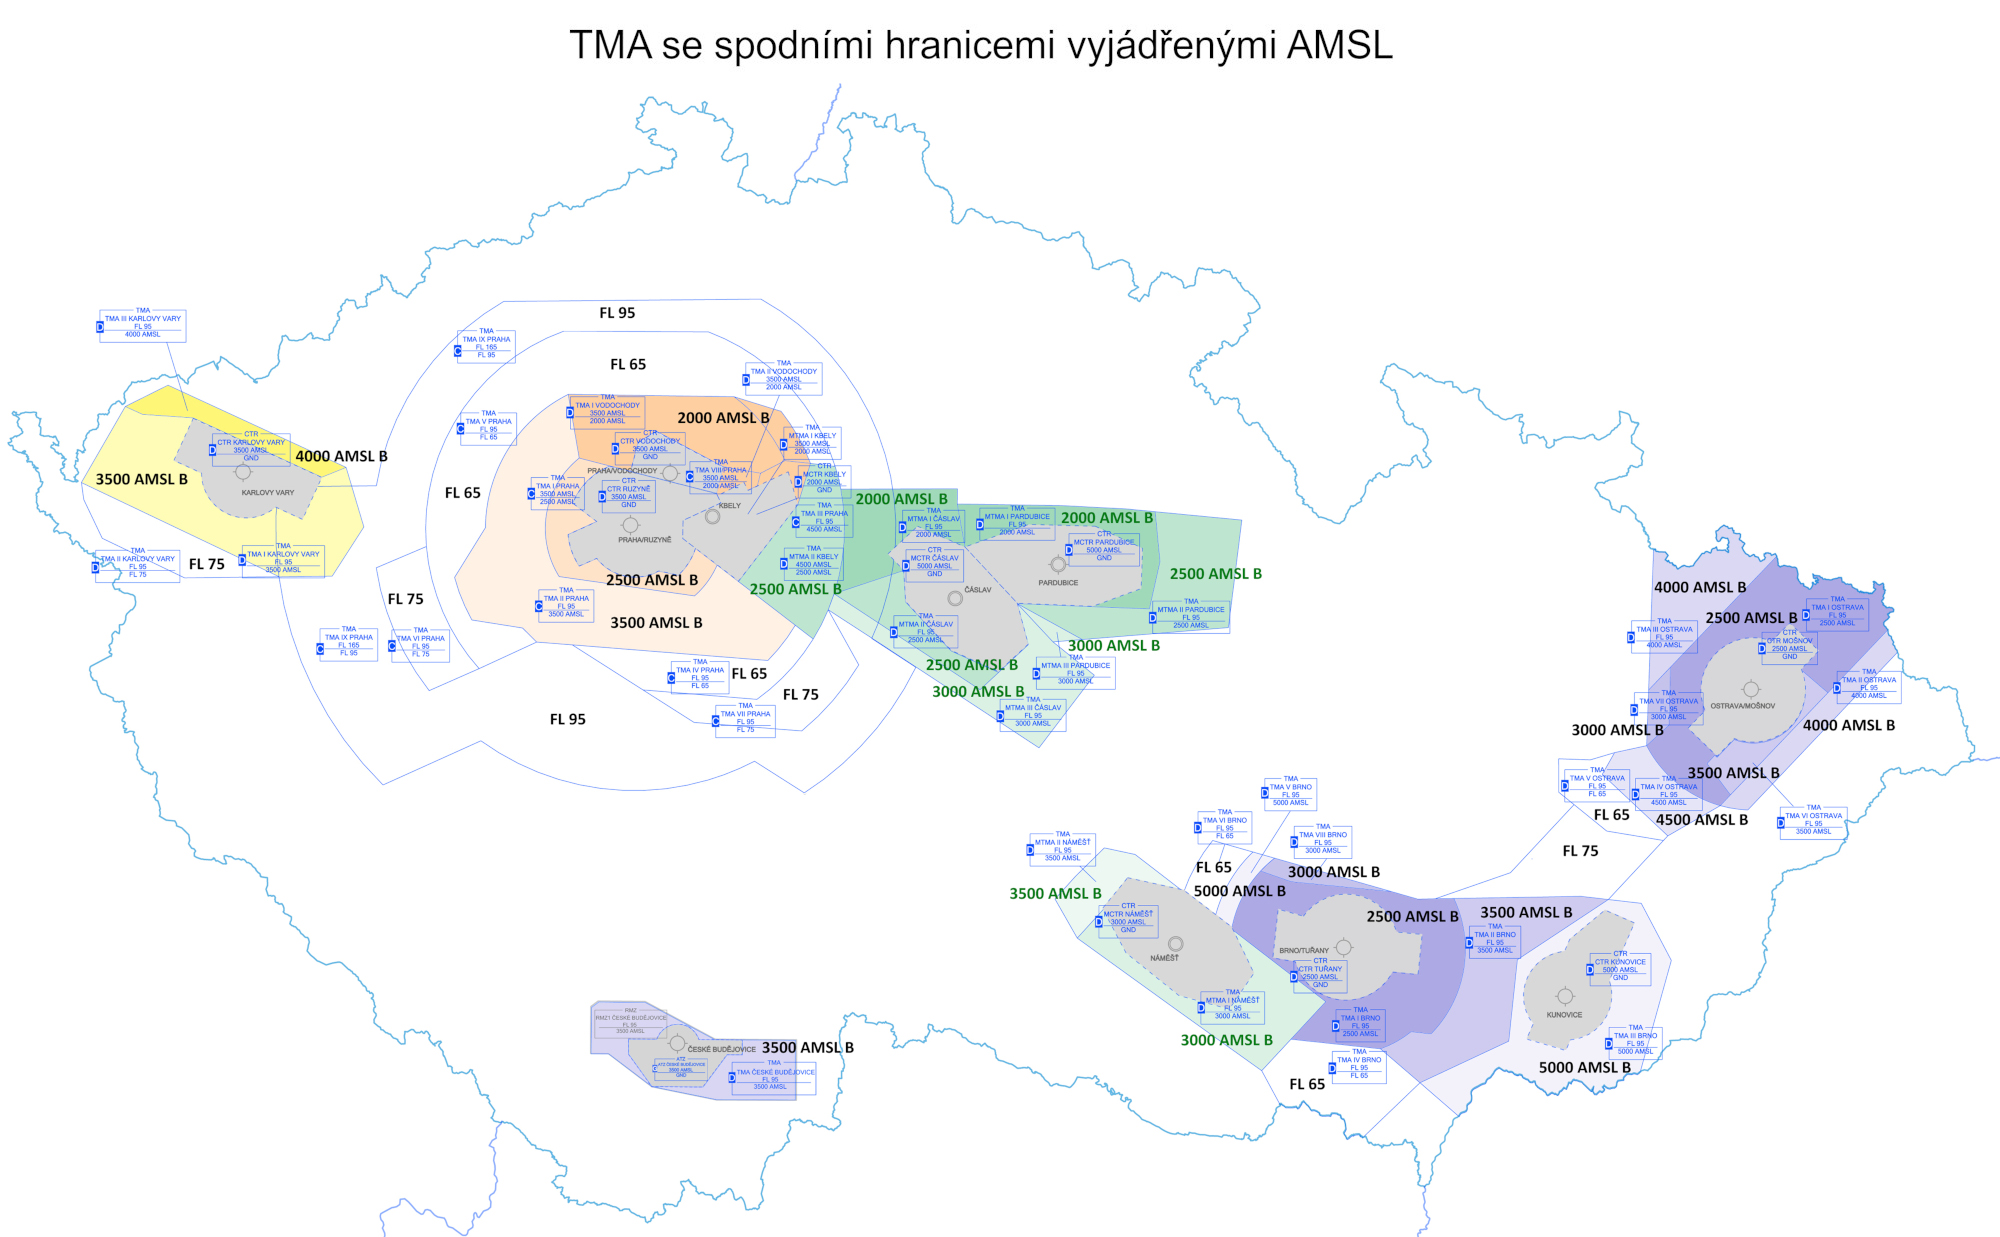 TMA with lower limit defined by AMSL